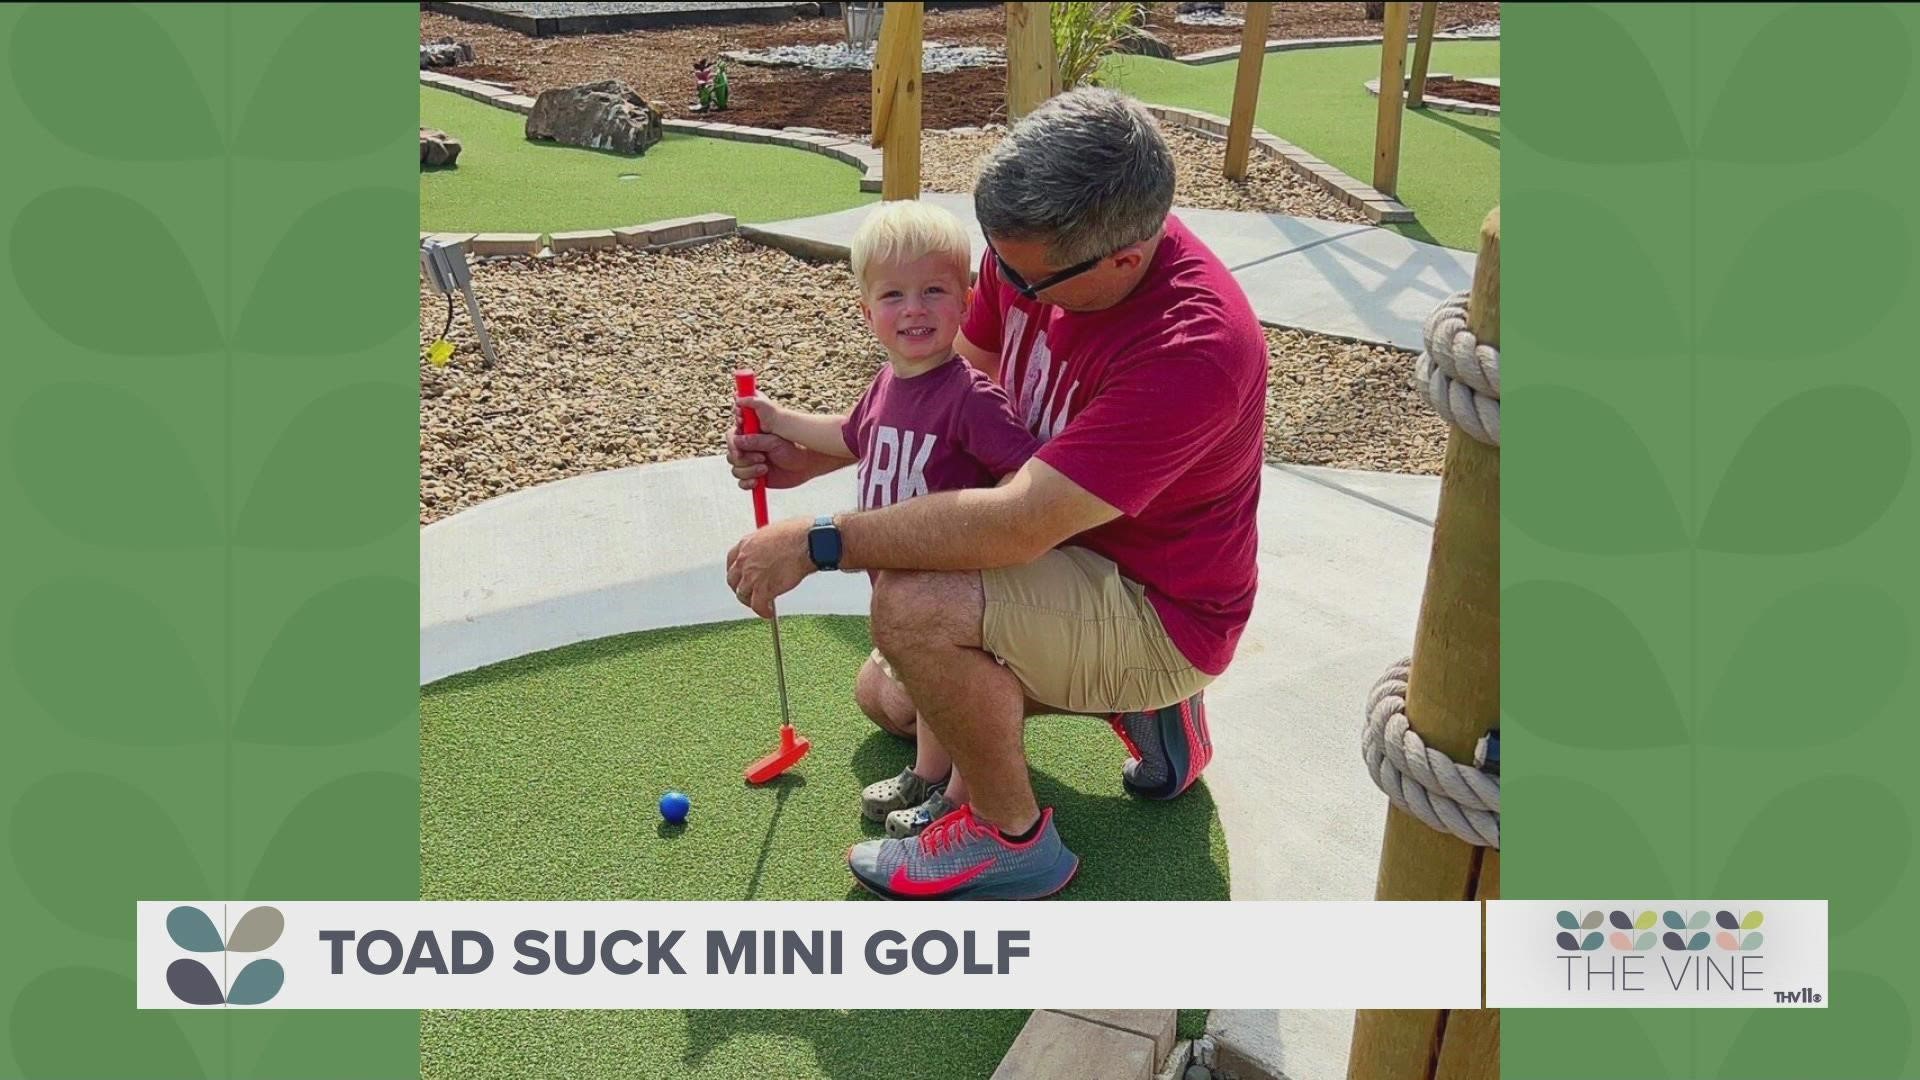 Faulkner County has a new place to have fun with your friends or family or for a date night — Toad Suck Mini Golf!